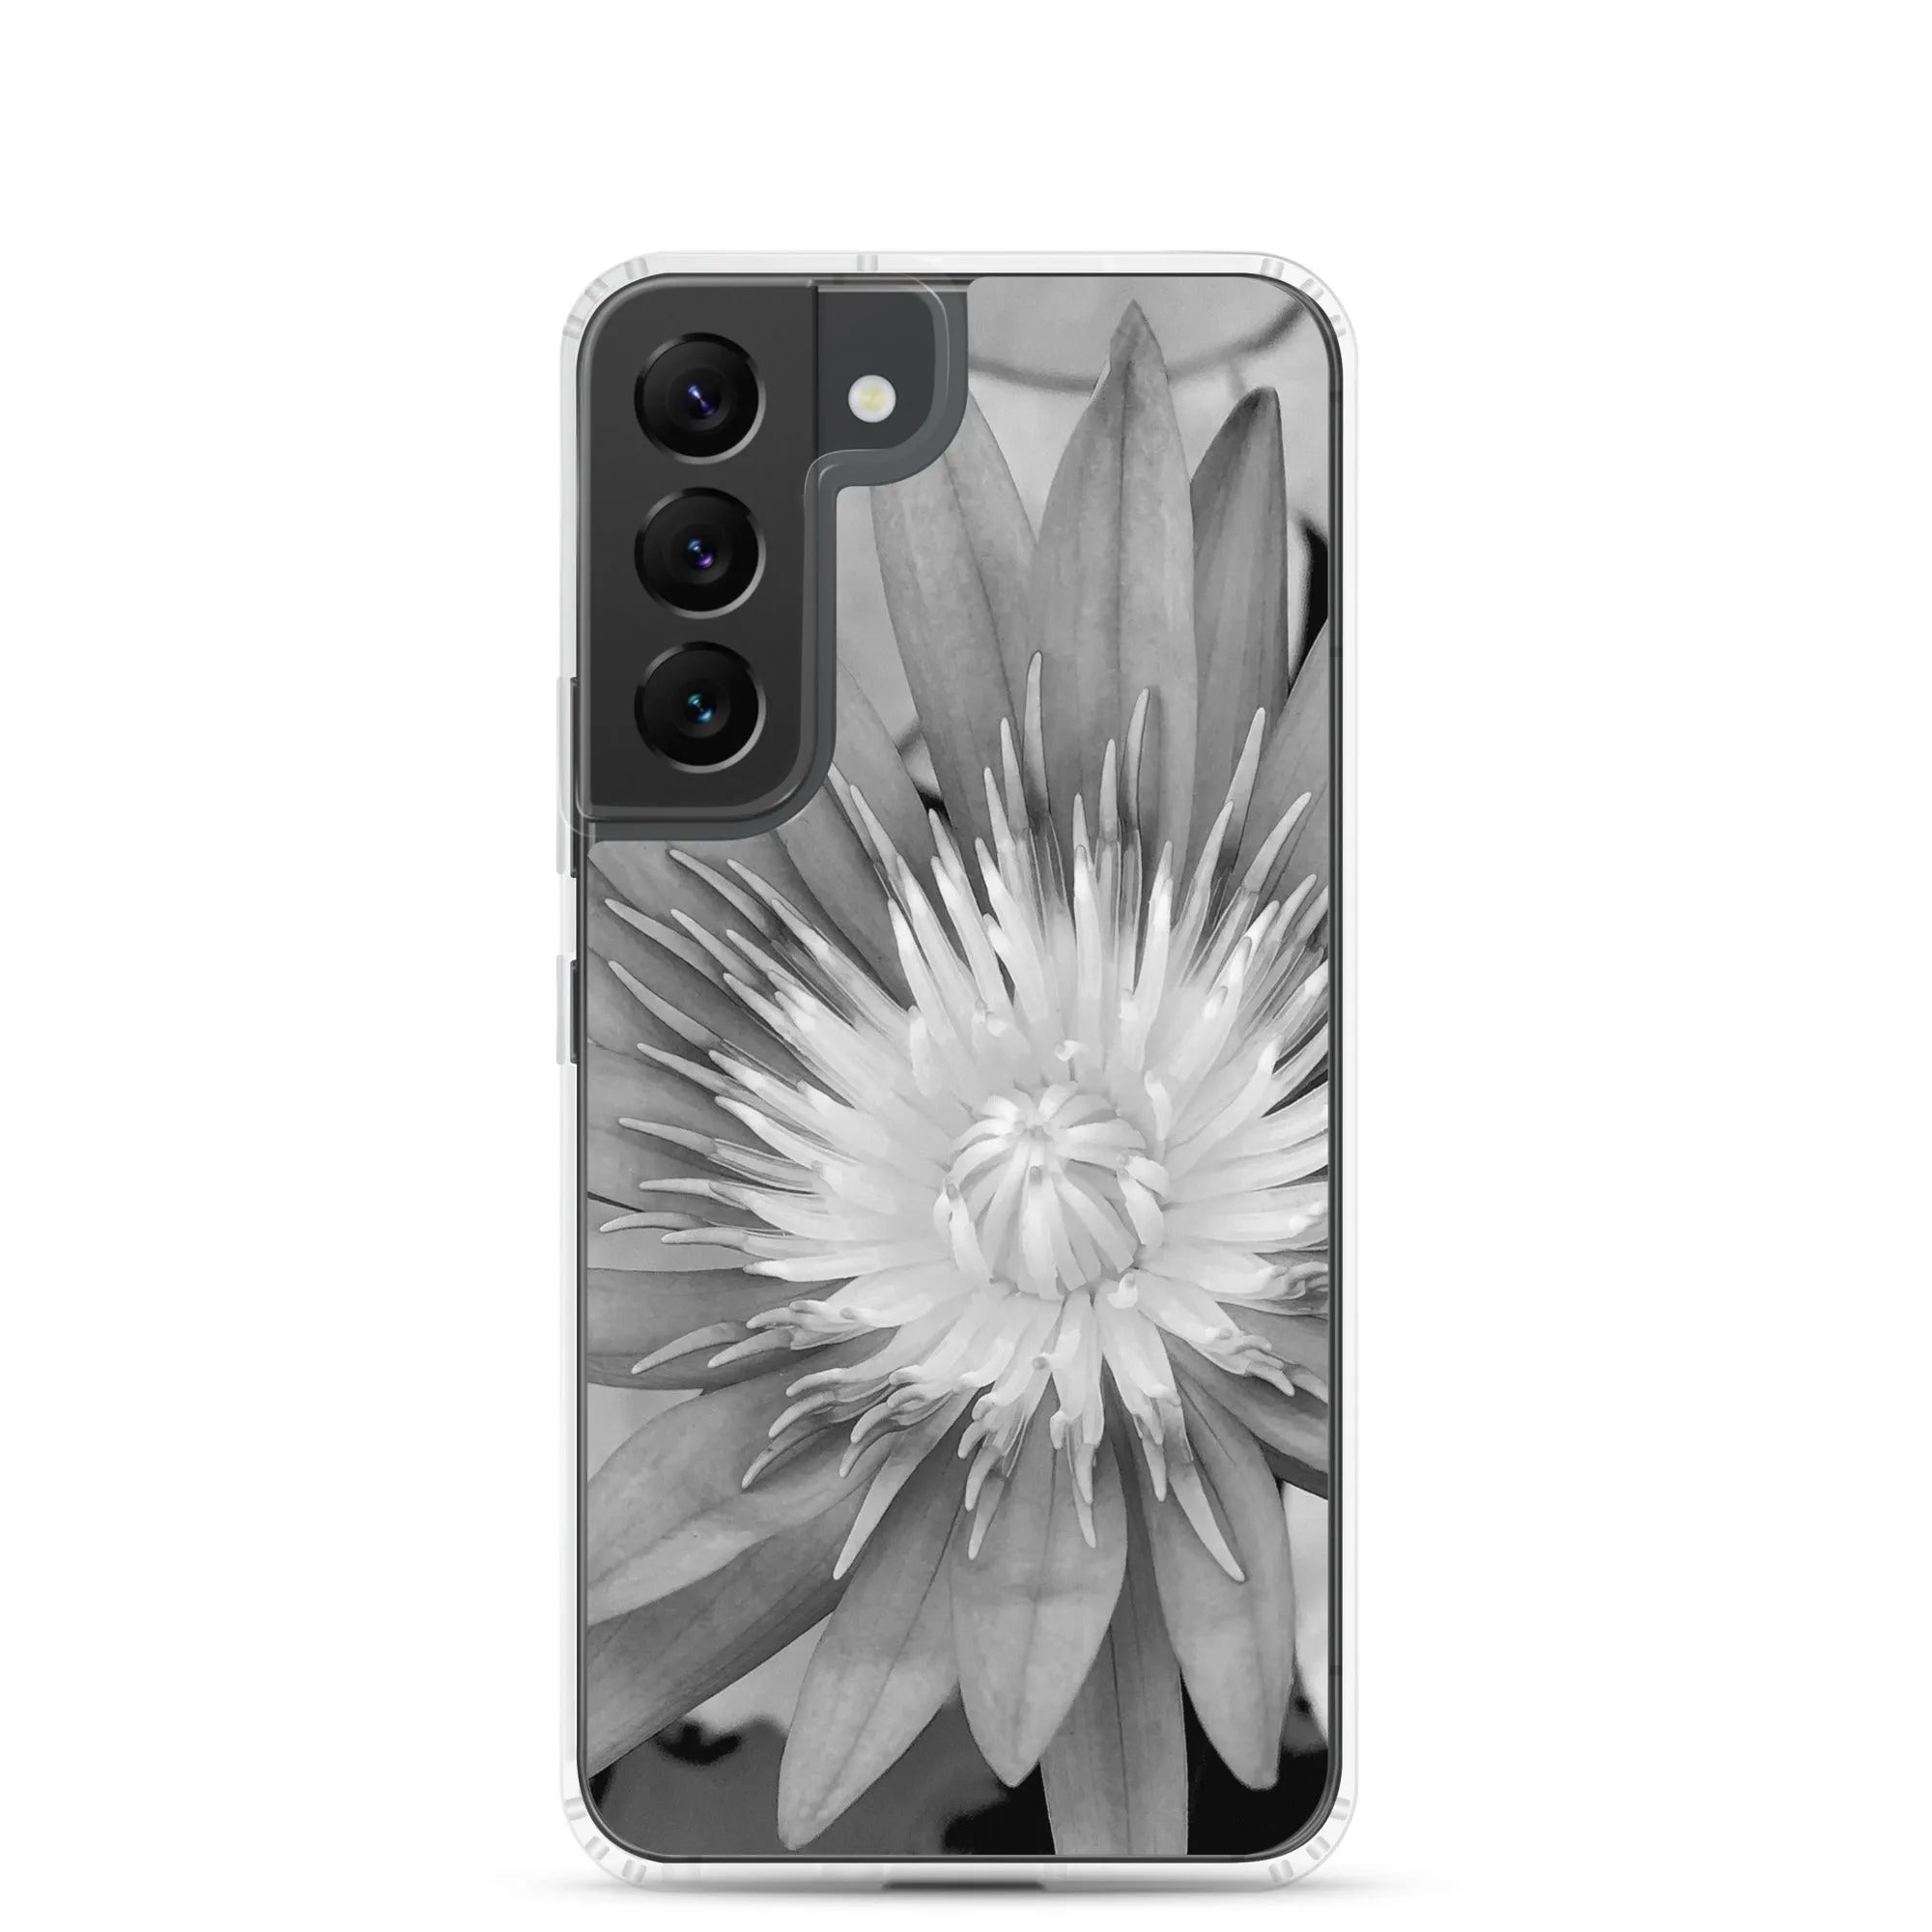 Lilliput Samsung Galaxy Case - Black And White - Samsung Galaxy S22 - Mobile Phone Cases - Aesthetic Art